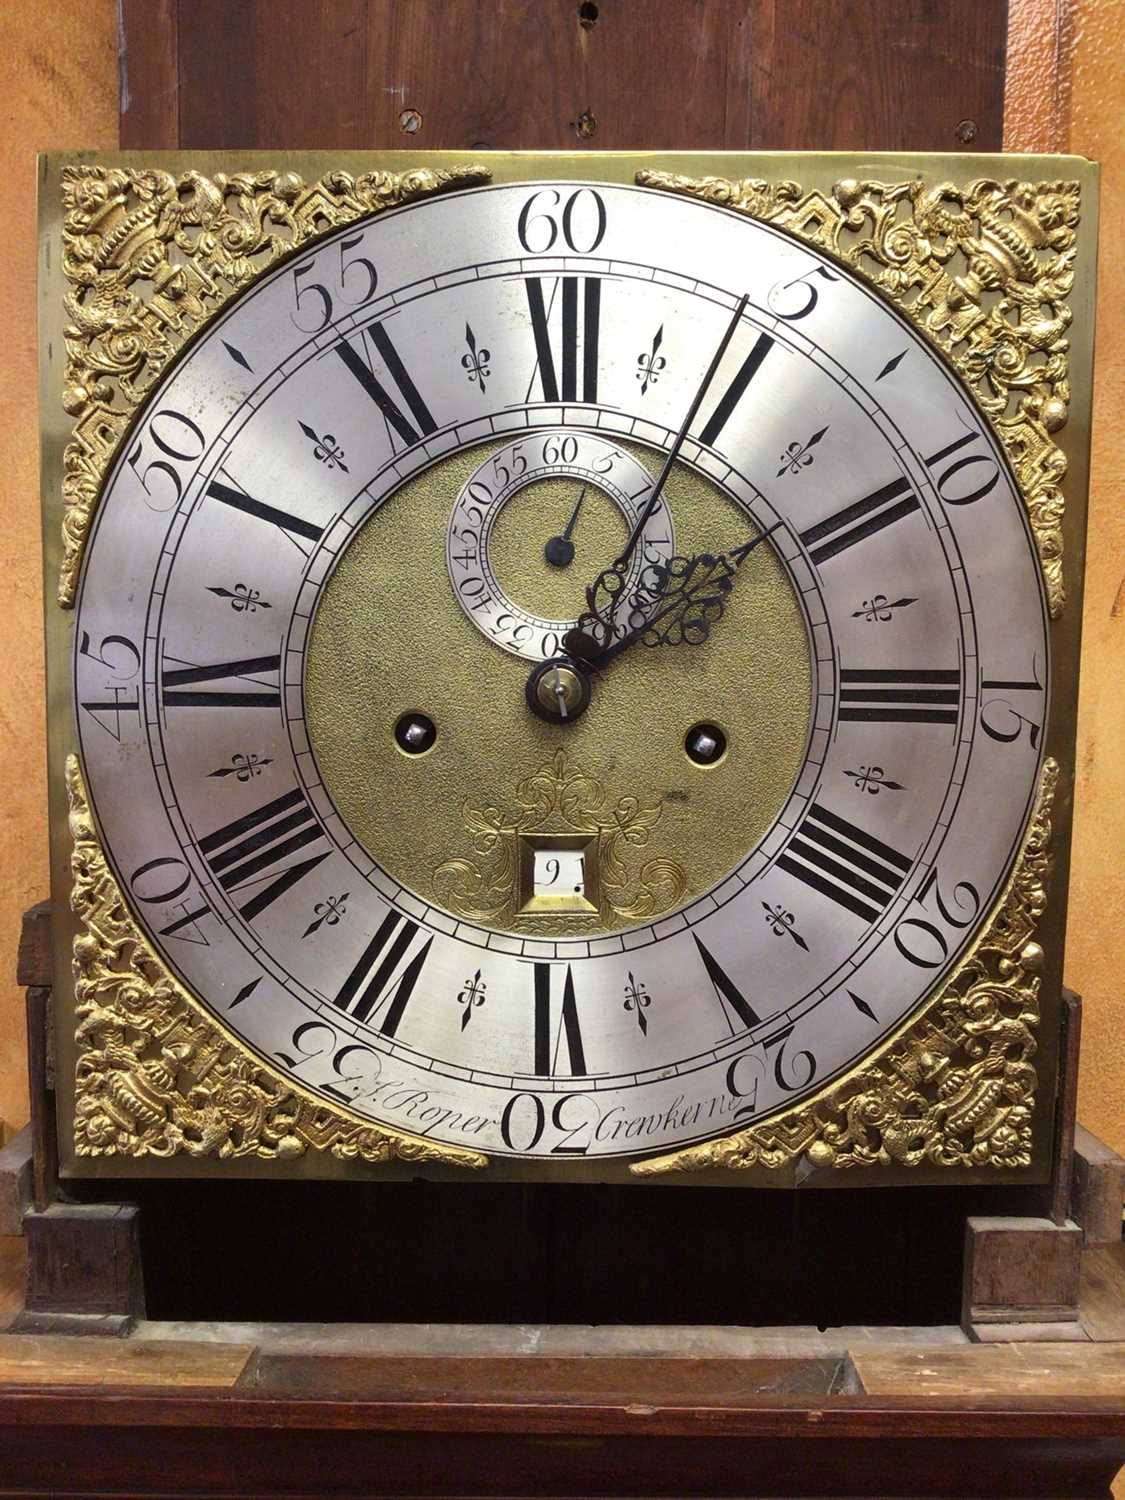 Mid 18th century 8 day longcase clock by Samuel Roper, Crewkerne - Image 3 of 7